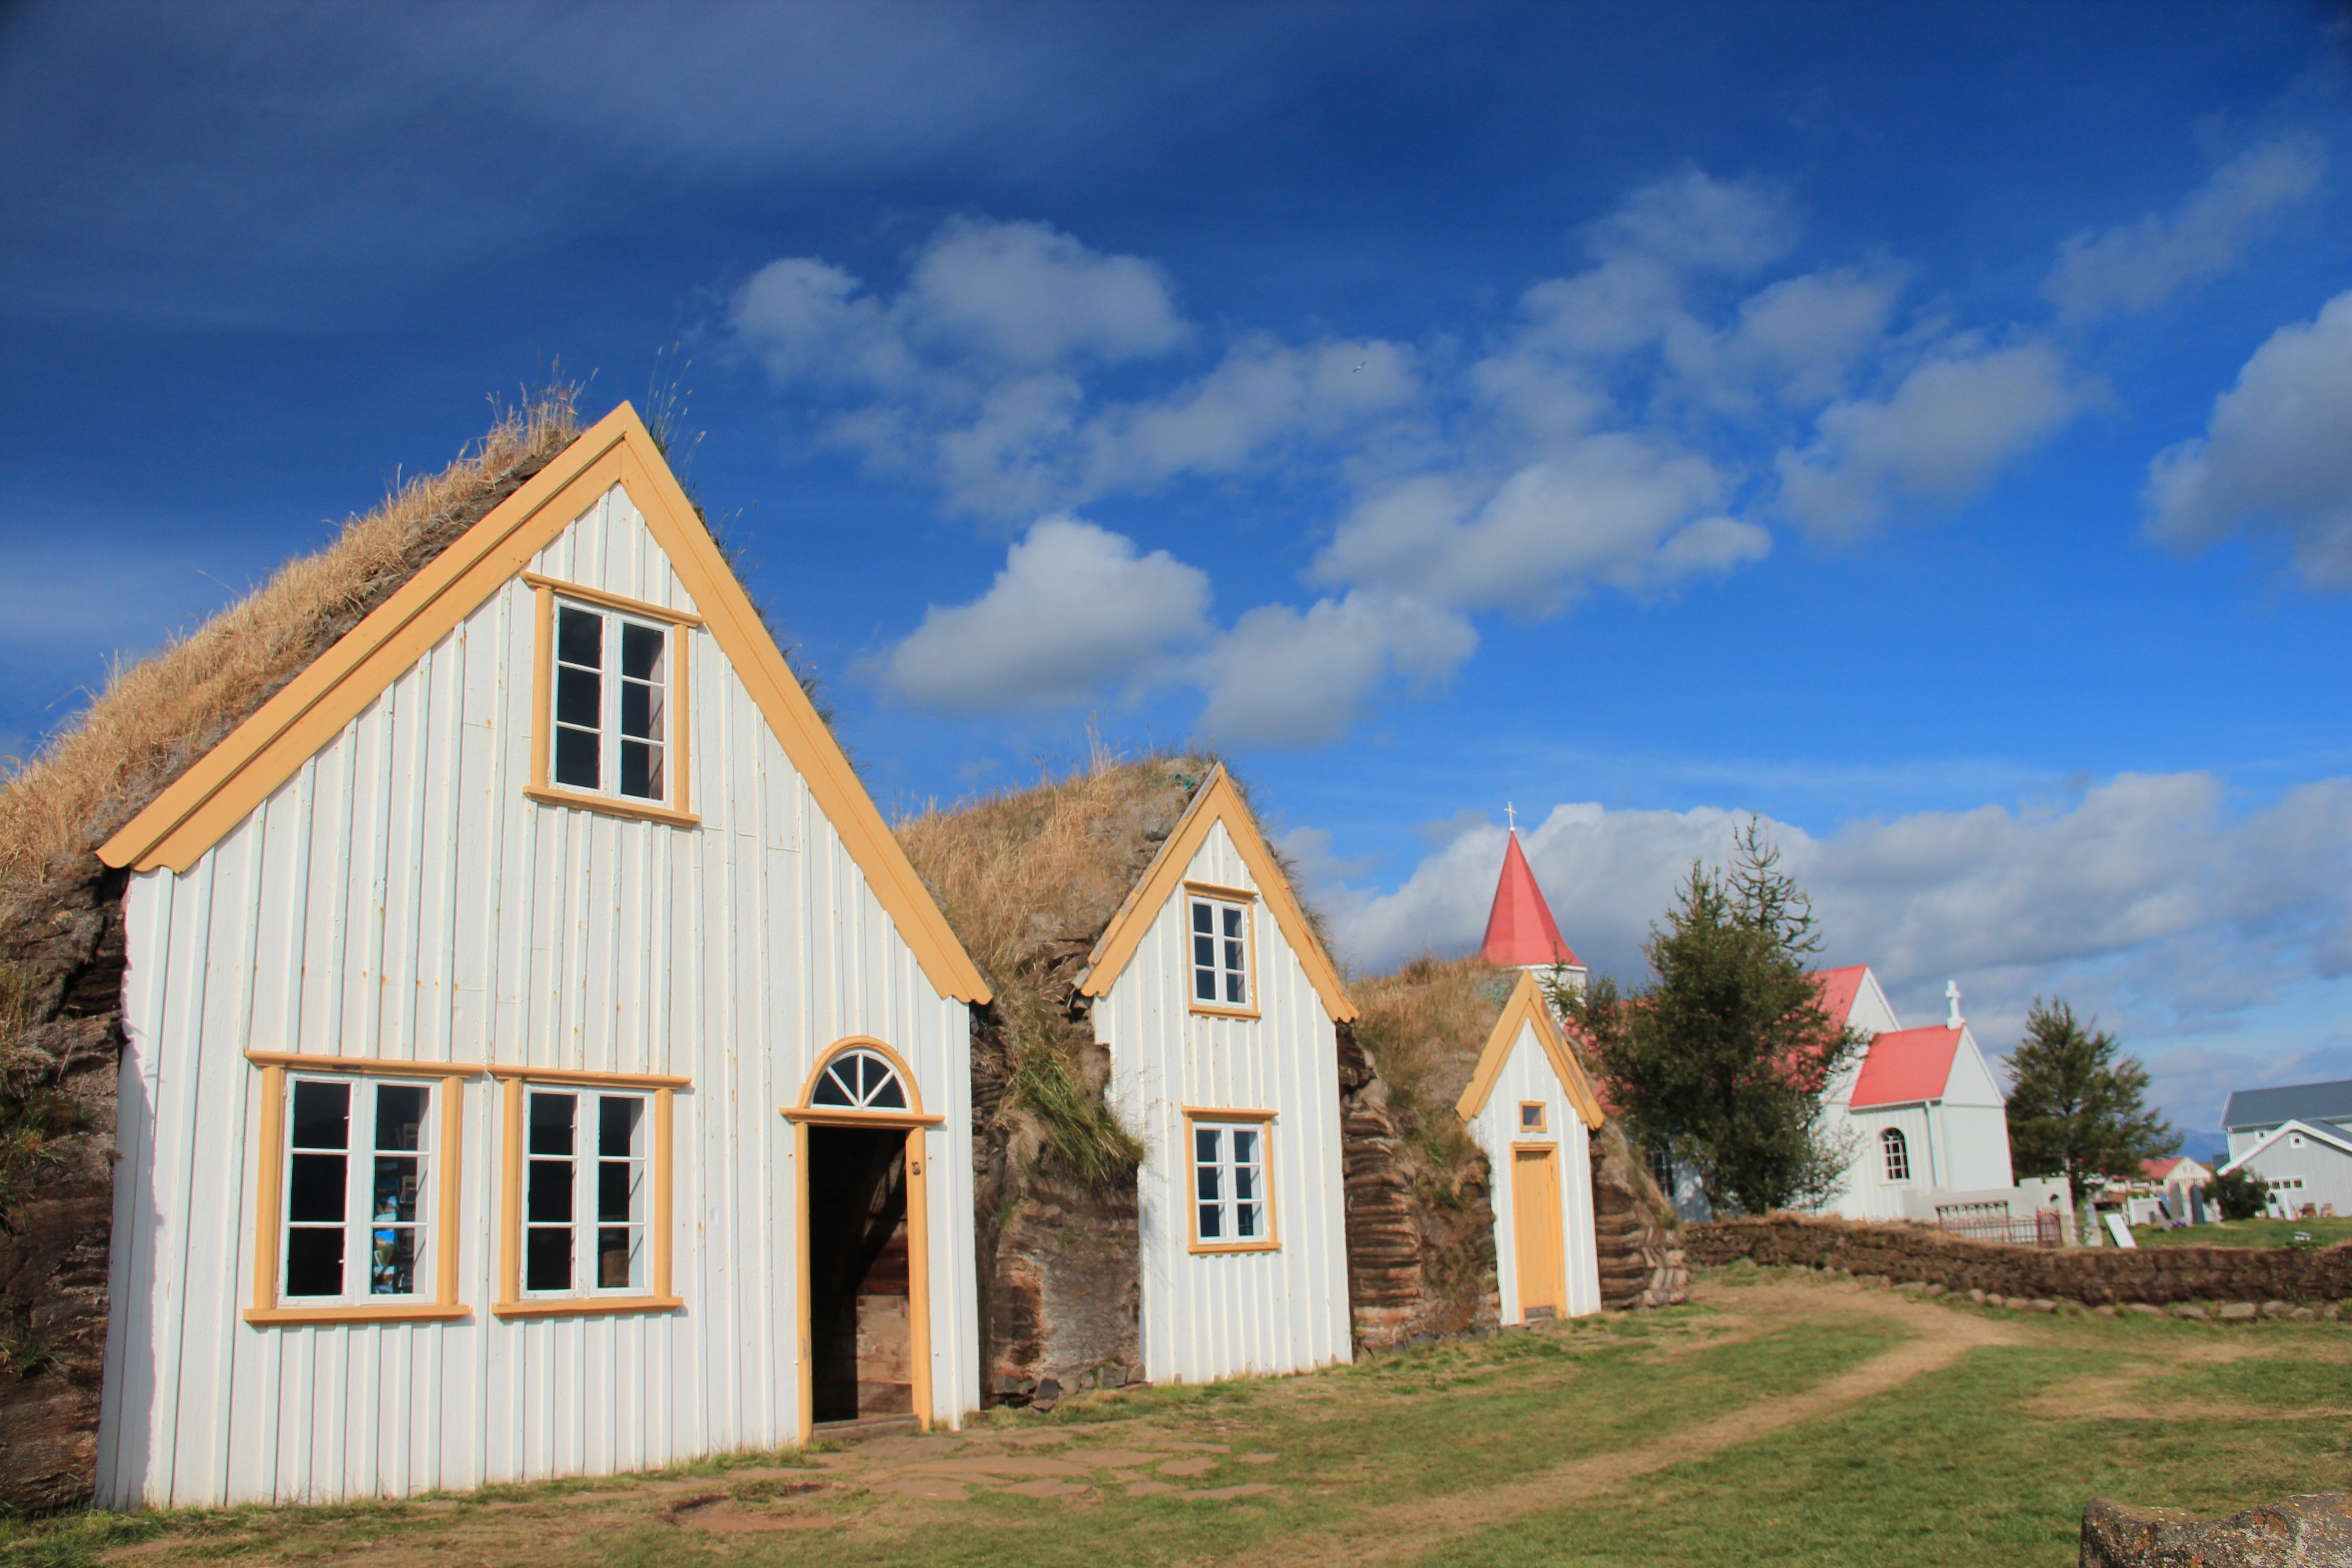 white-and-brown wooden residential houses